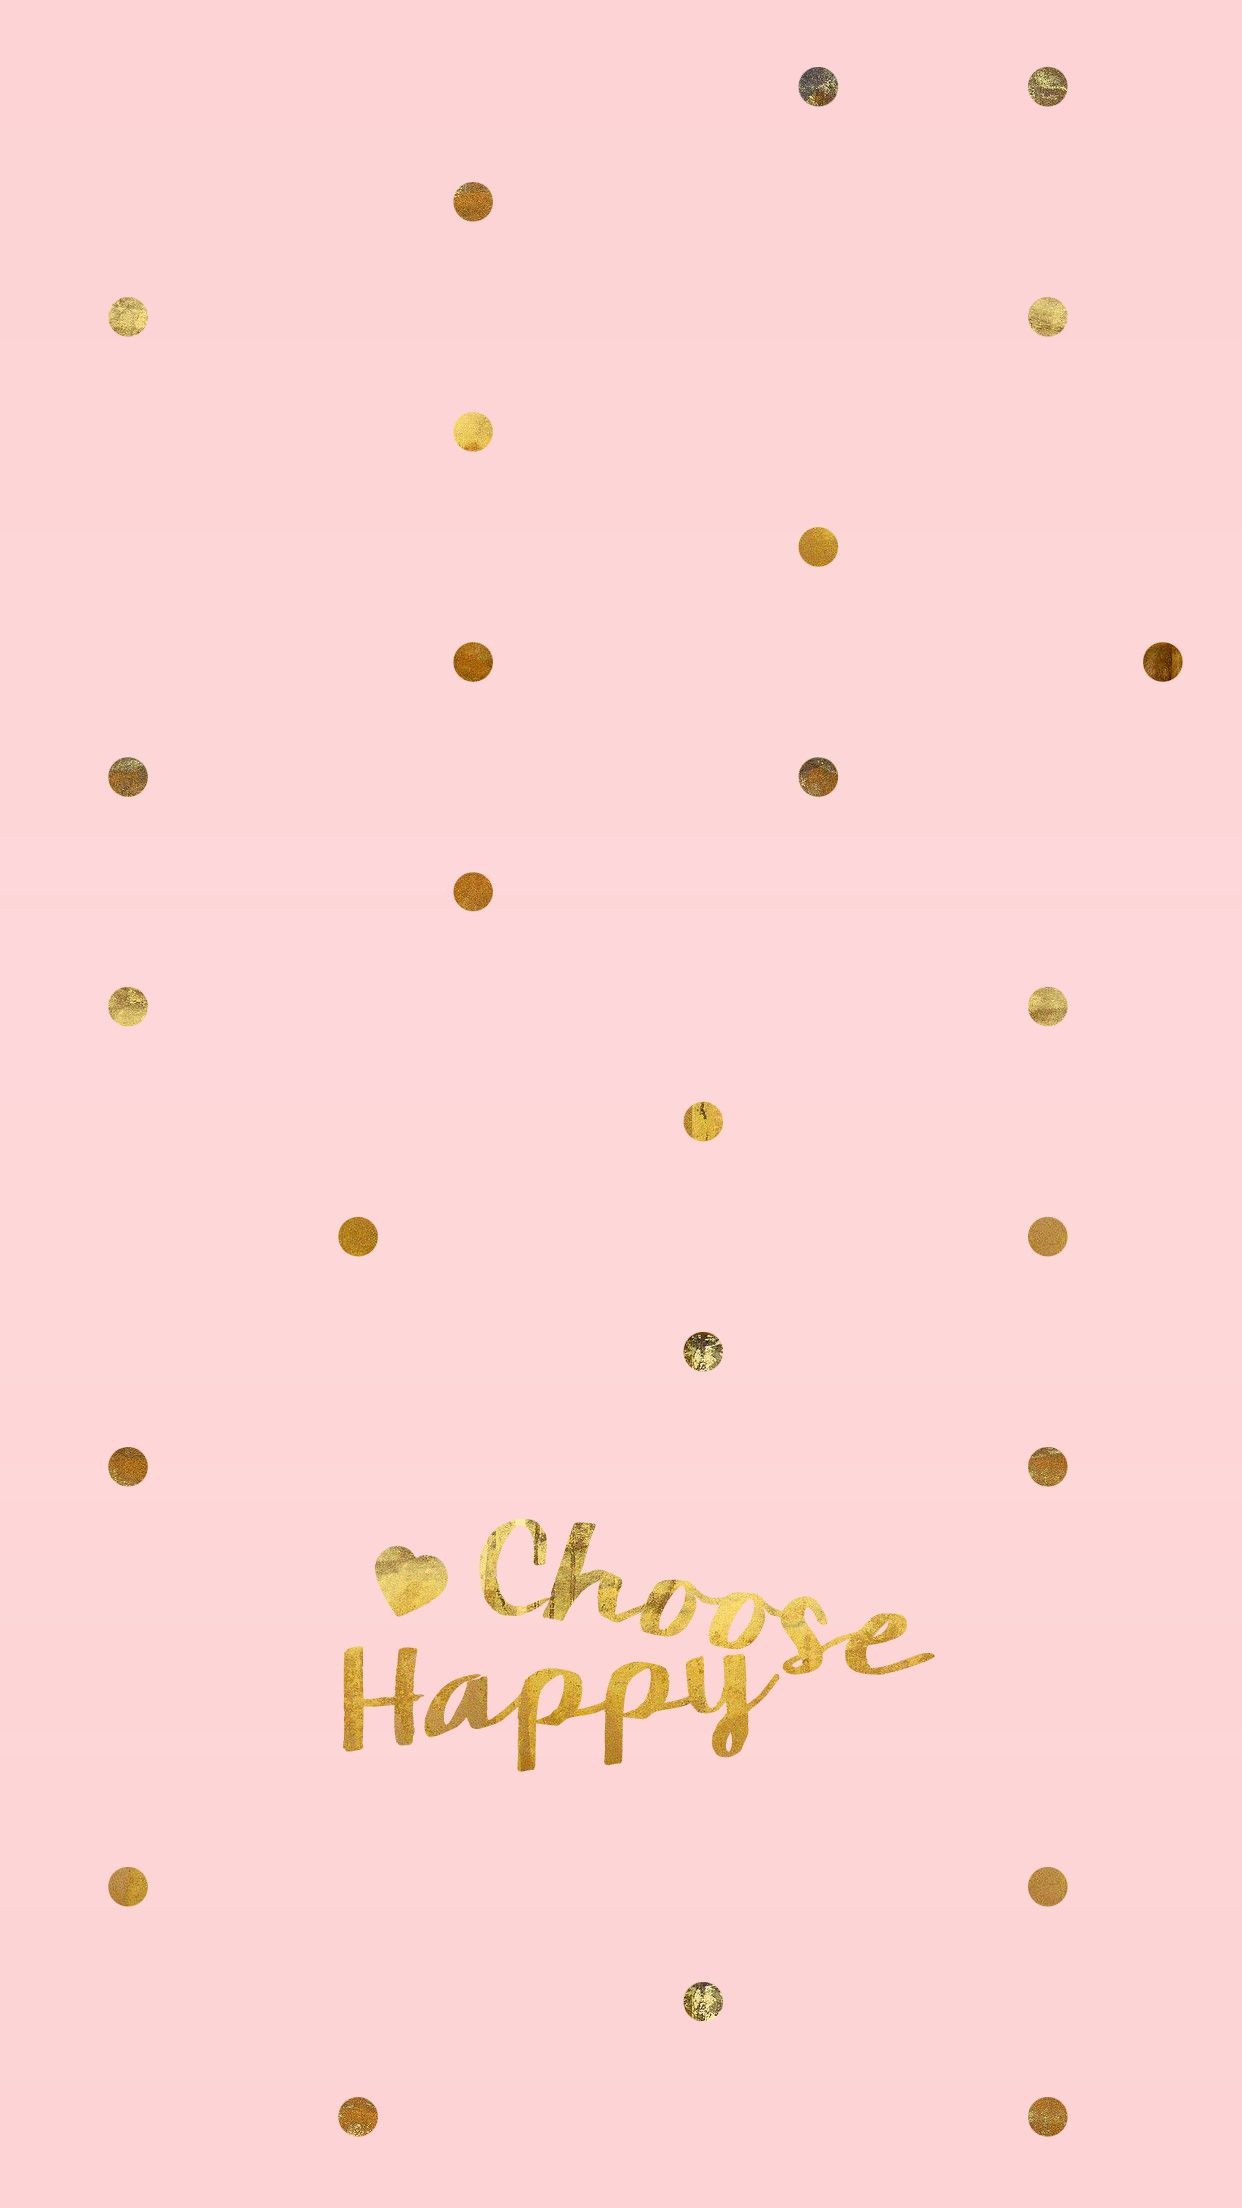 Choose happy wallpapers, Top free backgrounds, Opt for happiness, Positive choices, 1250x2210 HD Phone